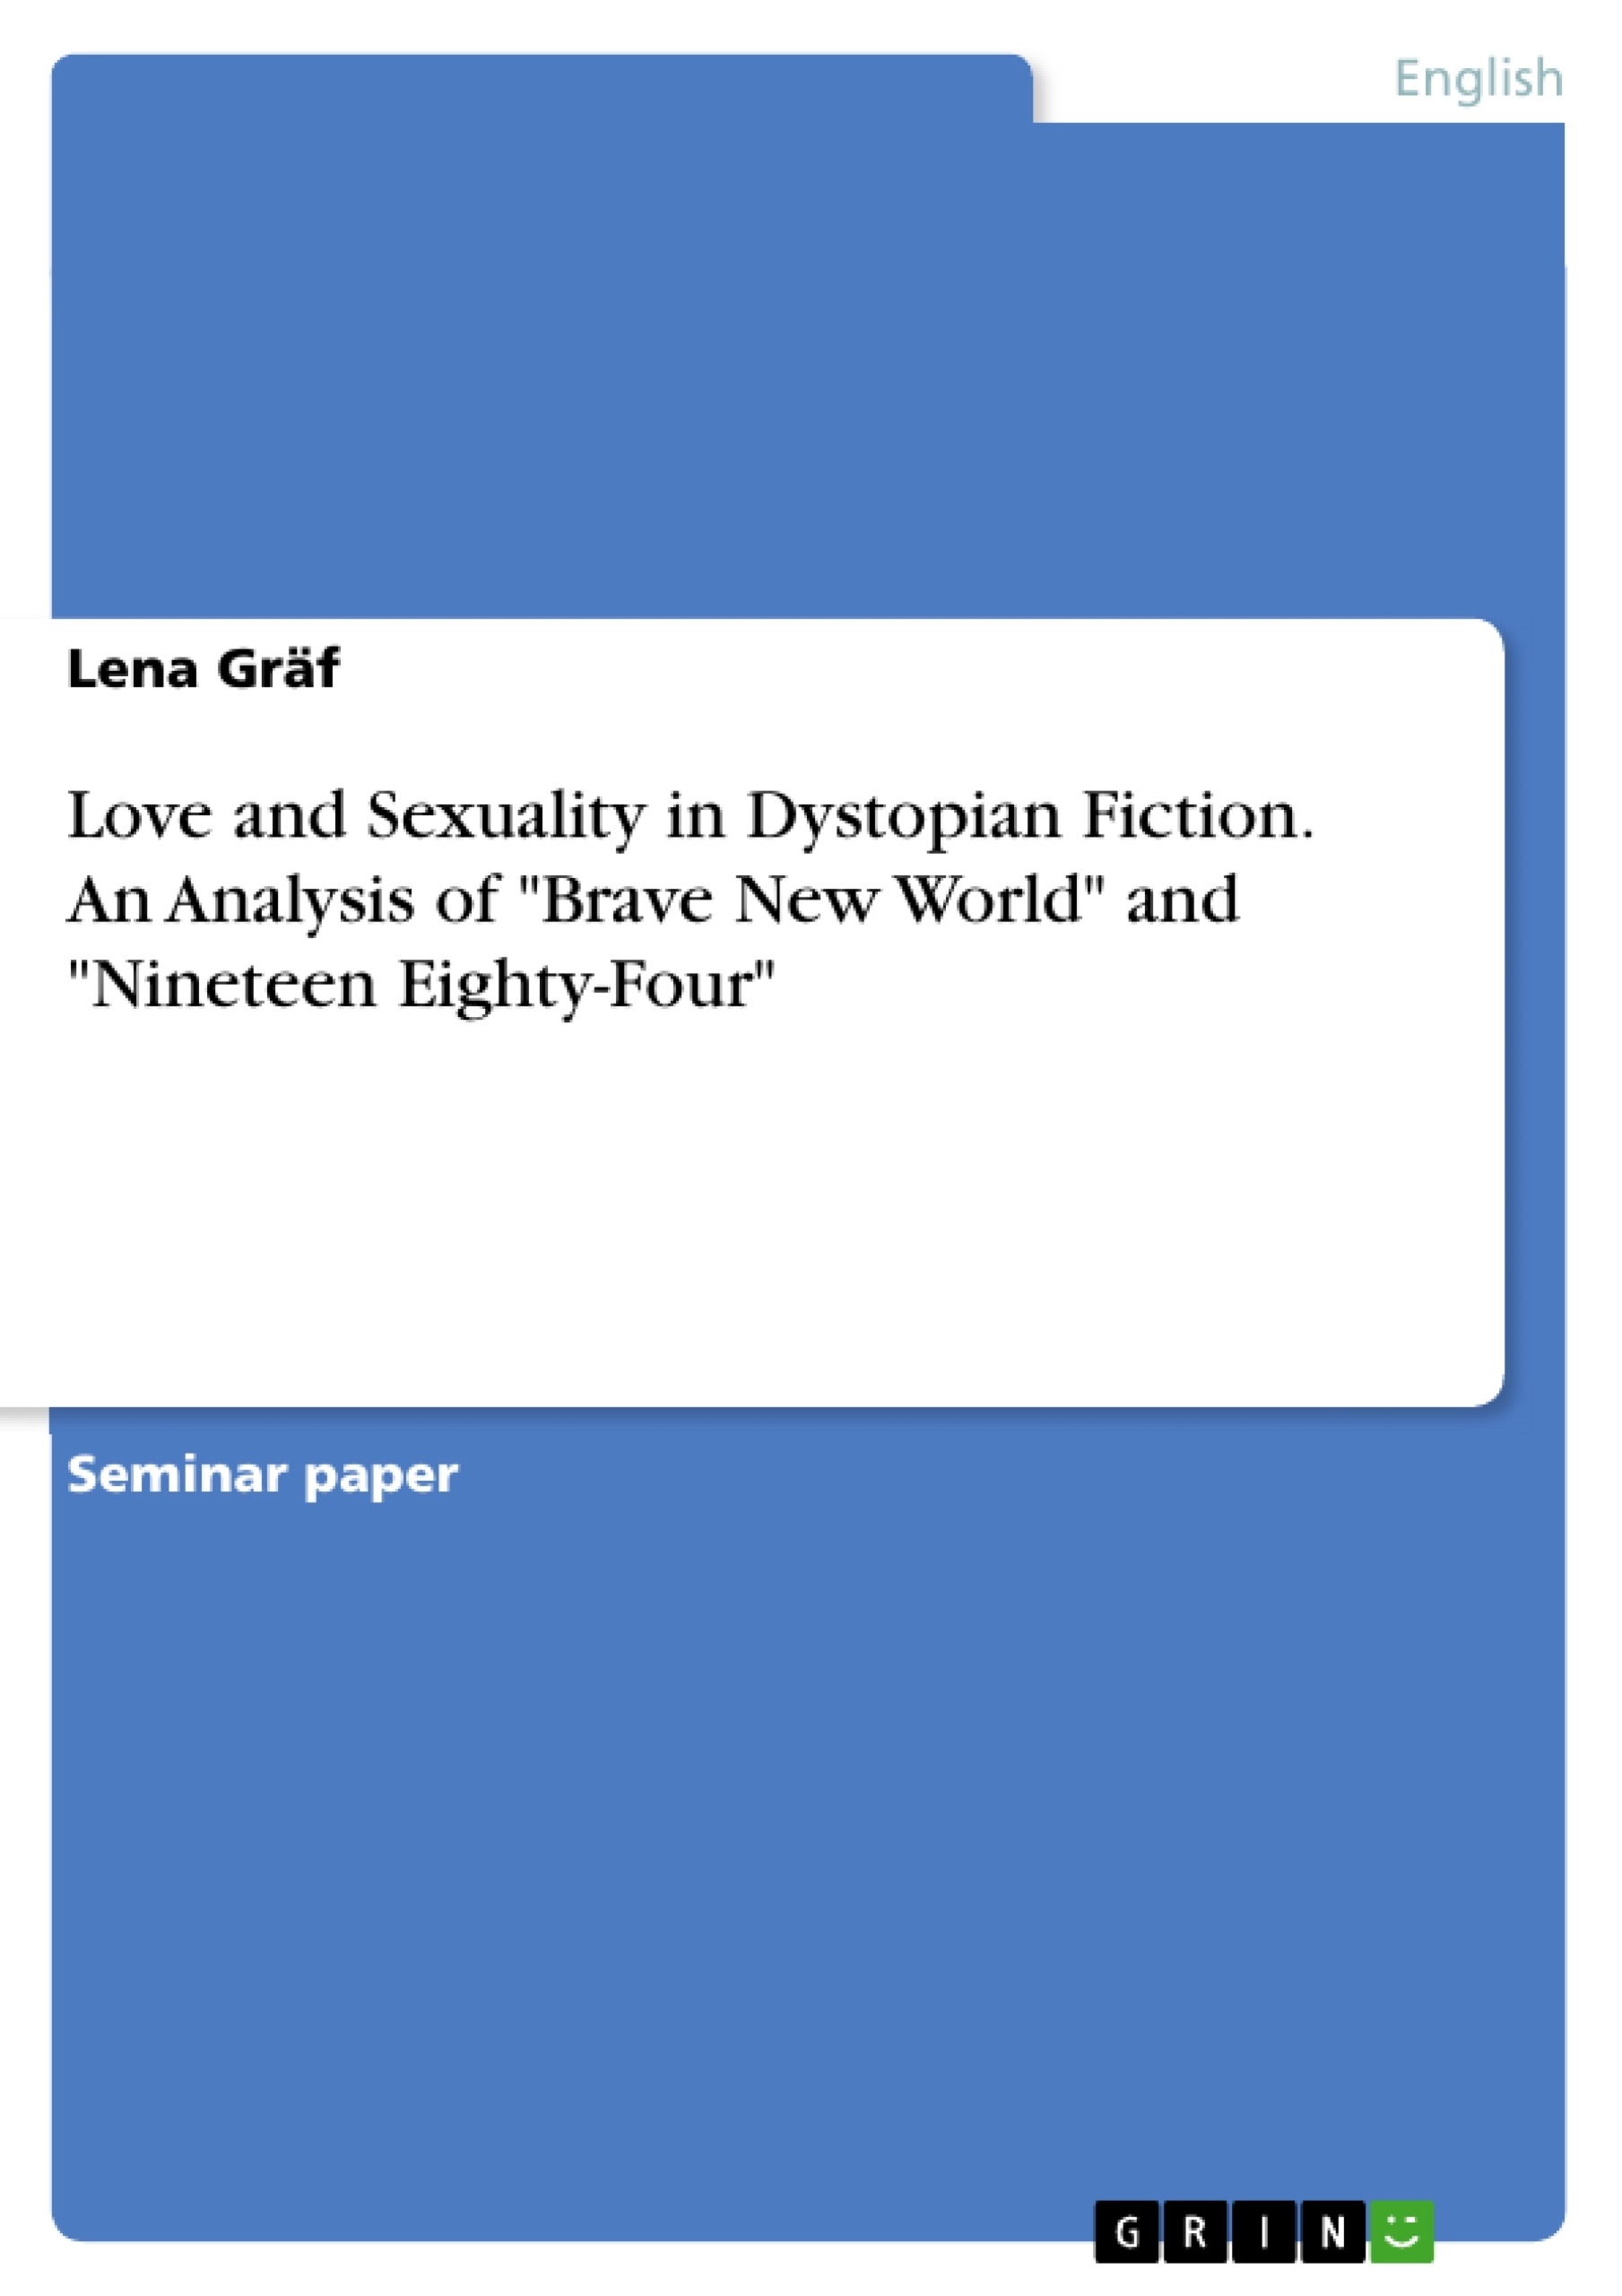 Title: Love and Sexuality in Dystopian Fiction. An Analysis of "Brave New World" and "Nineteen Eighty-Four"